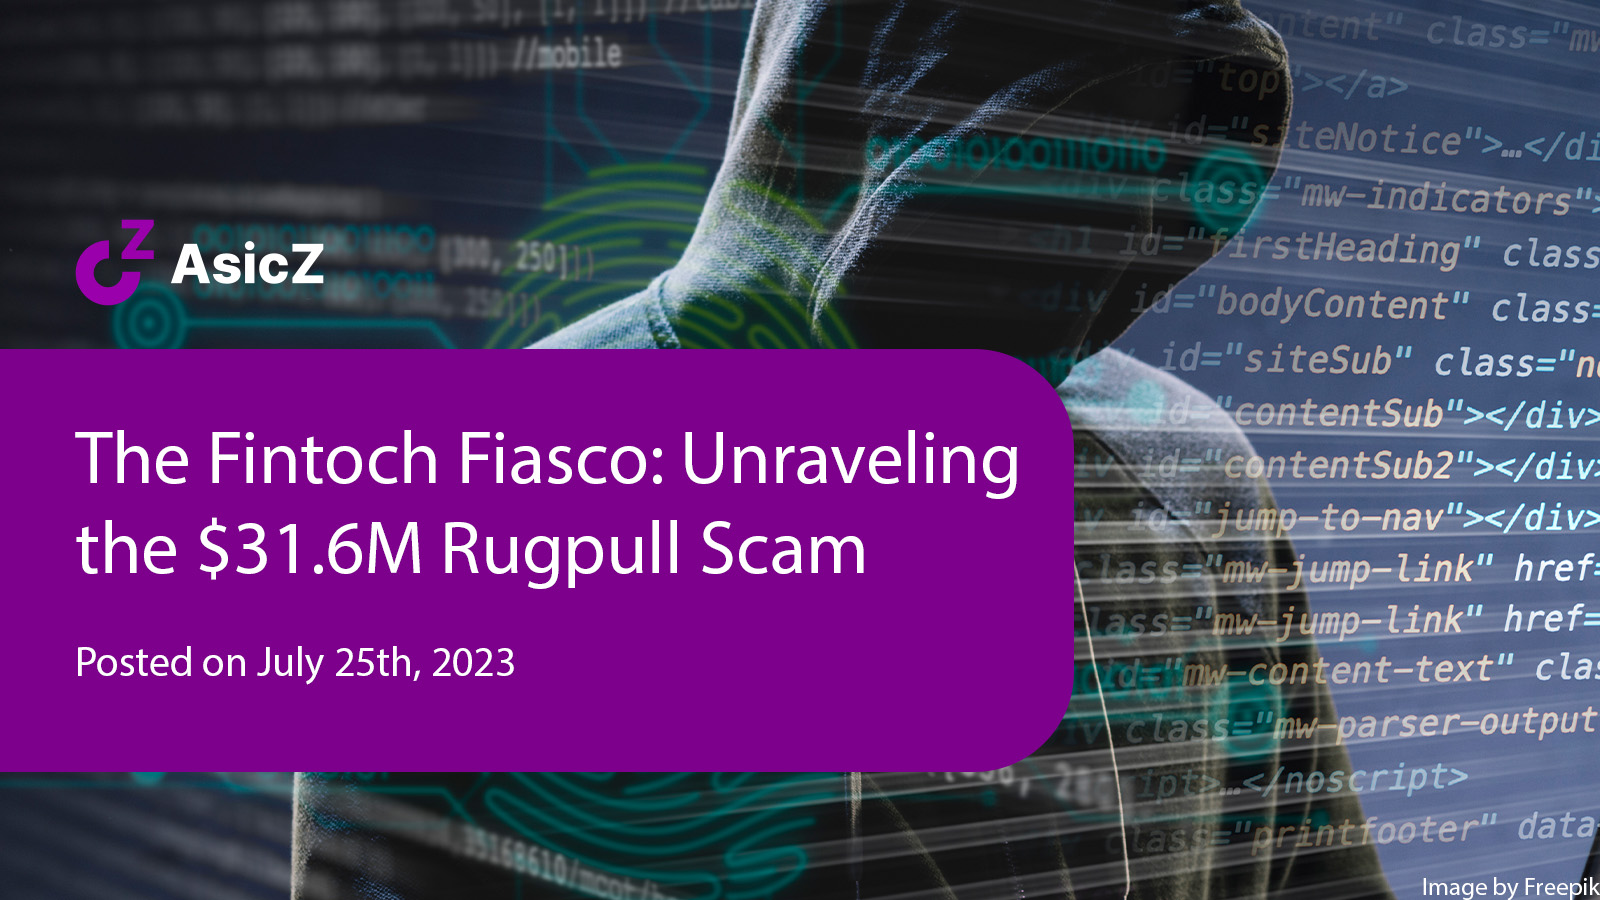 The Fintoch Fiasco: Unraveling the $31.6 Million Rugpull Scam